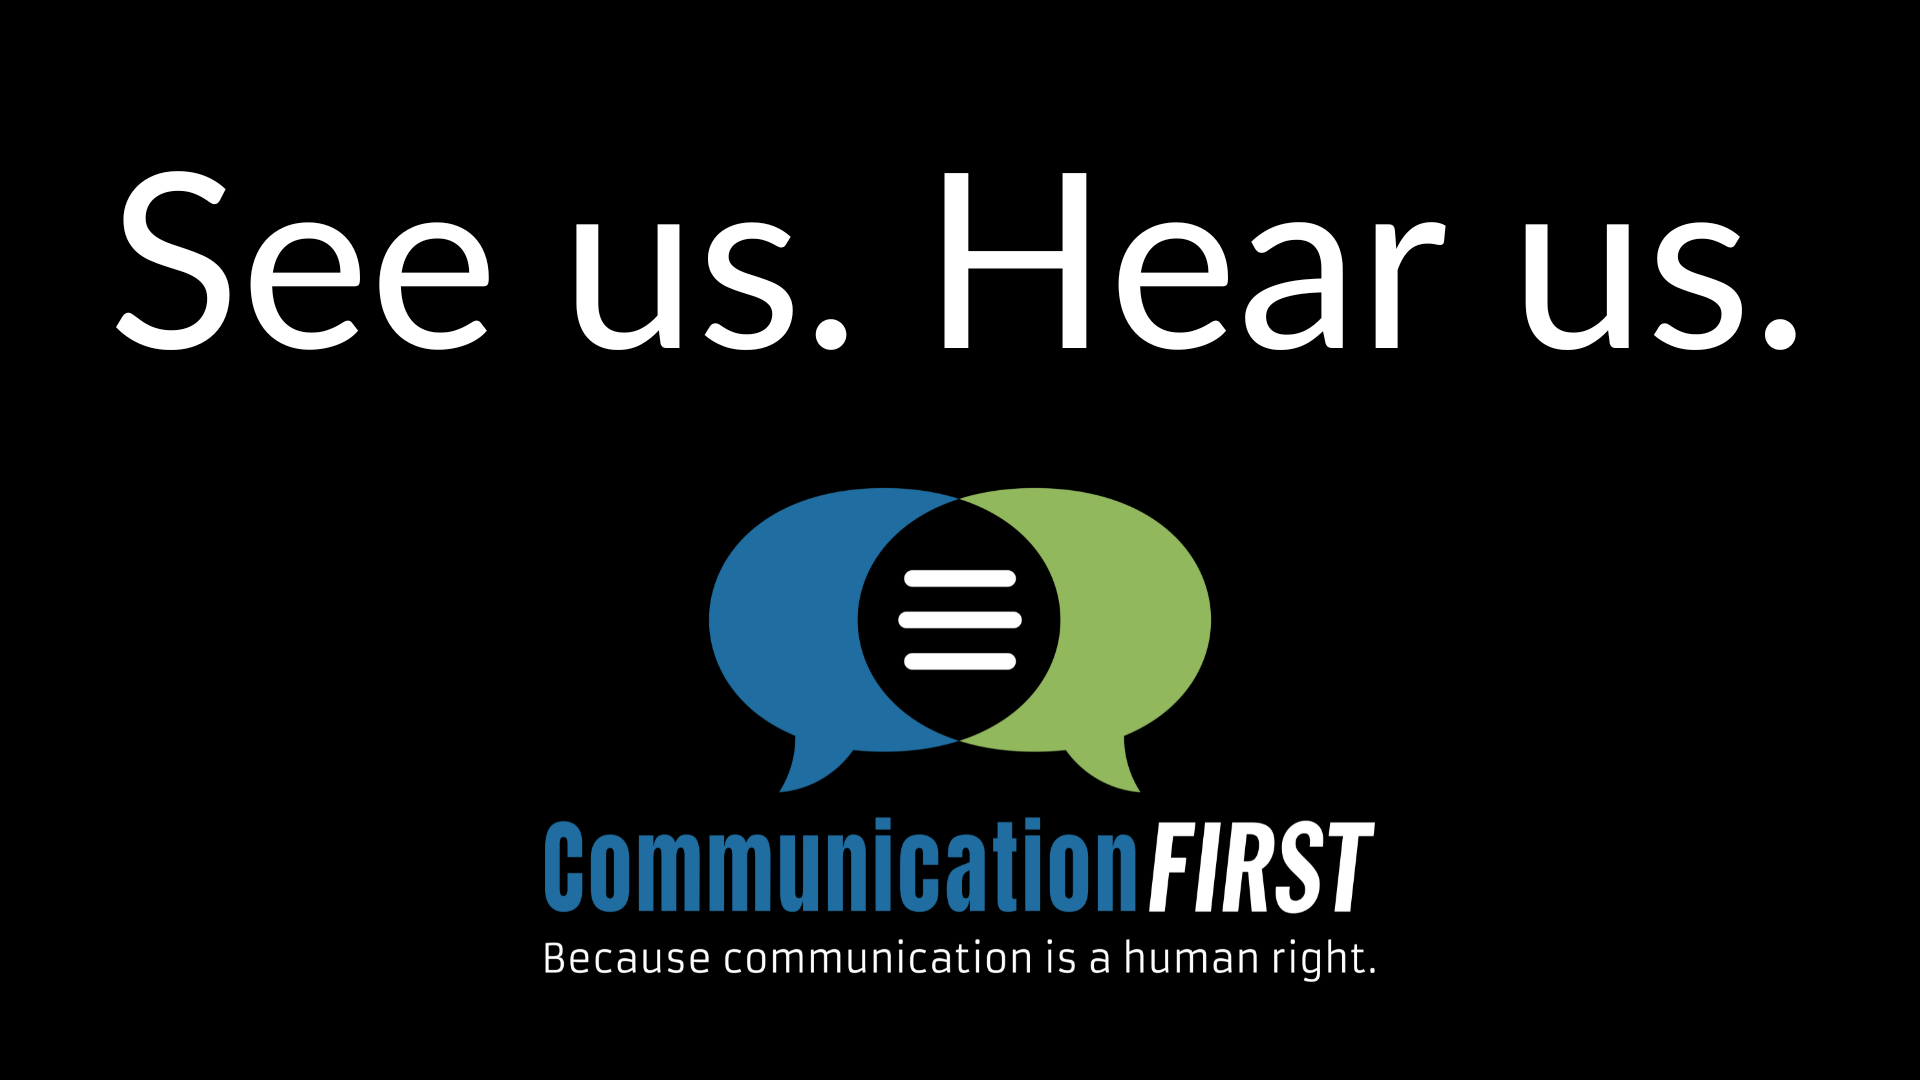 White text, "See us. Hear us." on a black background with the CommunicationFIRST logo in blue and green.